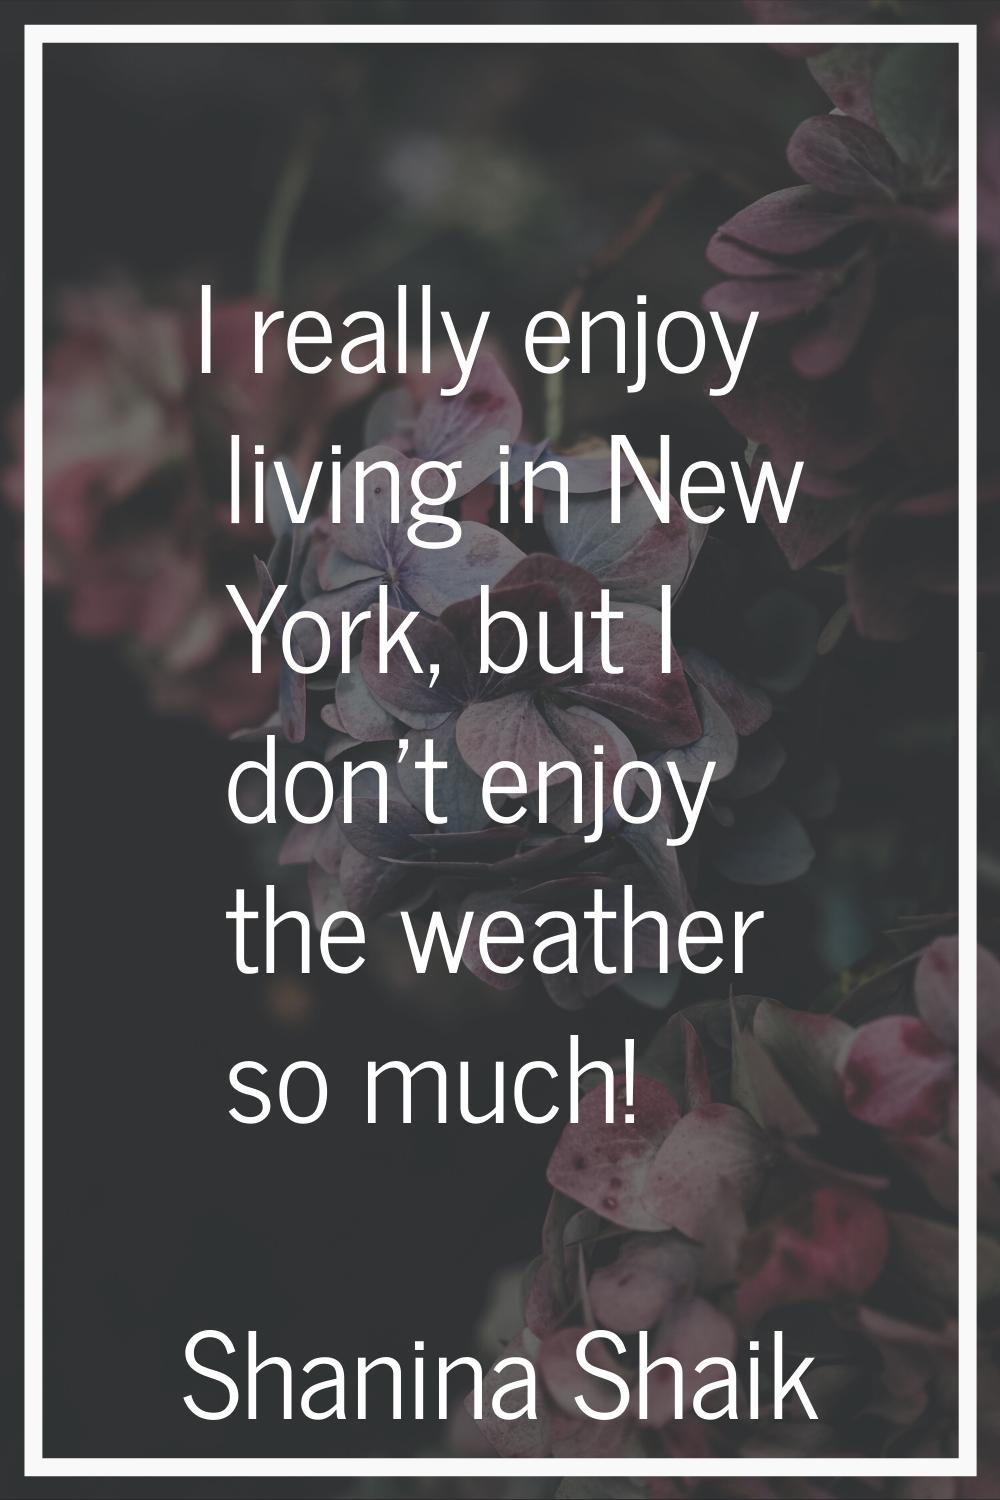 I really enjoy living in New York, but I don't enjoy the weather so much!